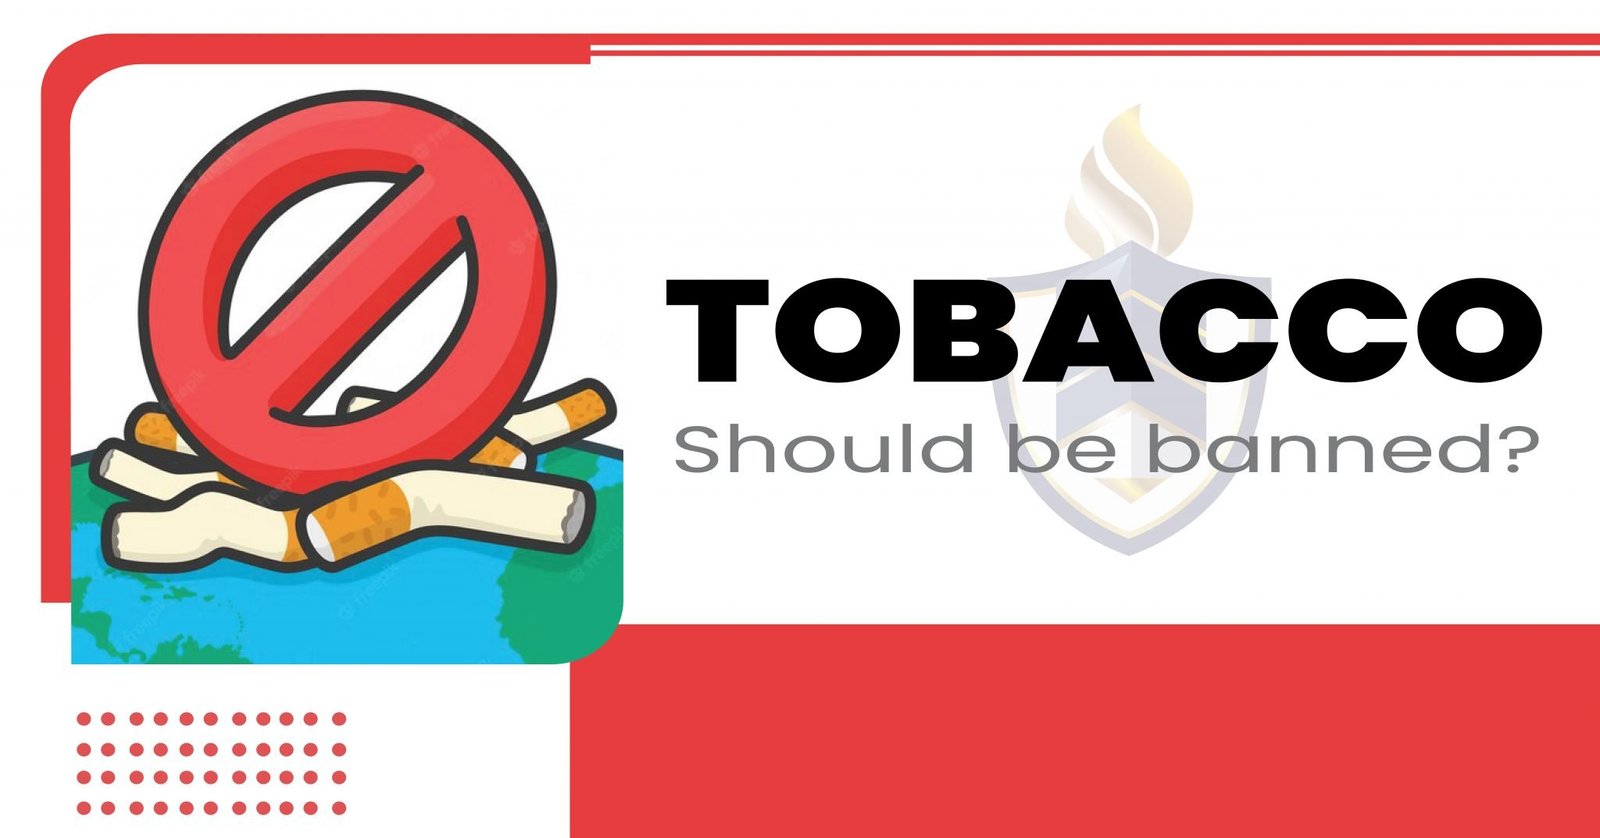 selling tobacco should be banned essay wikipedia